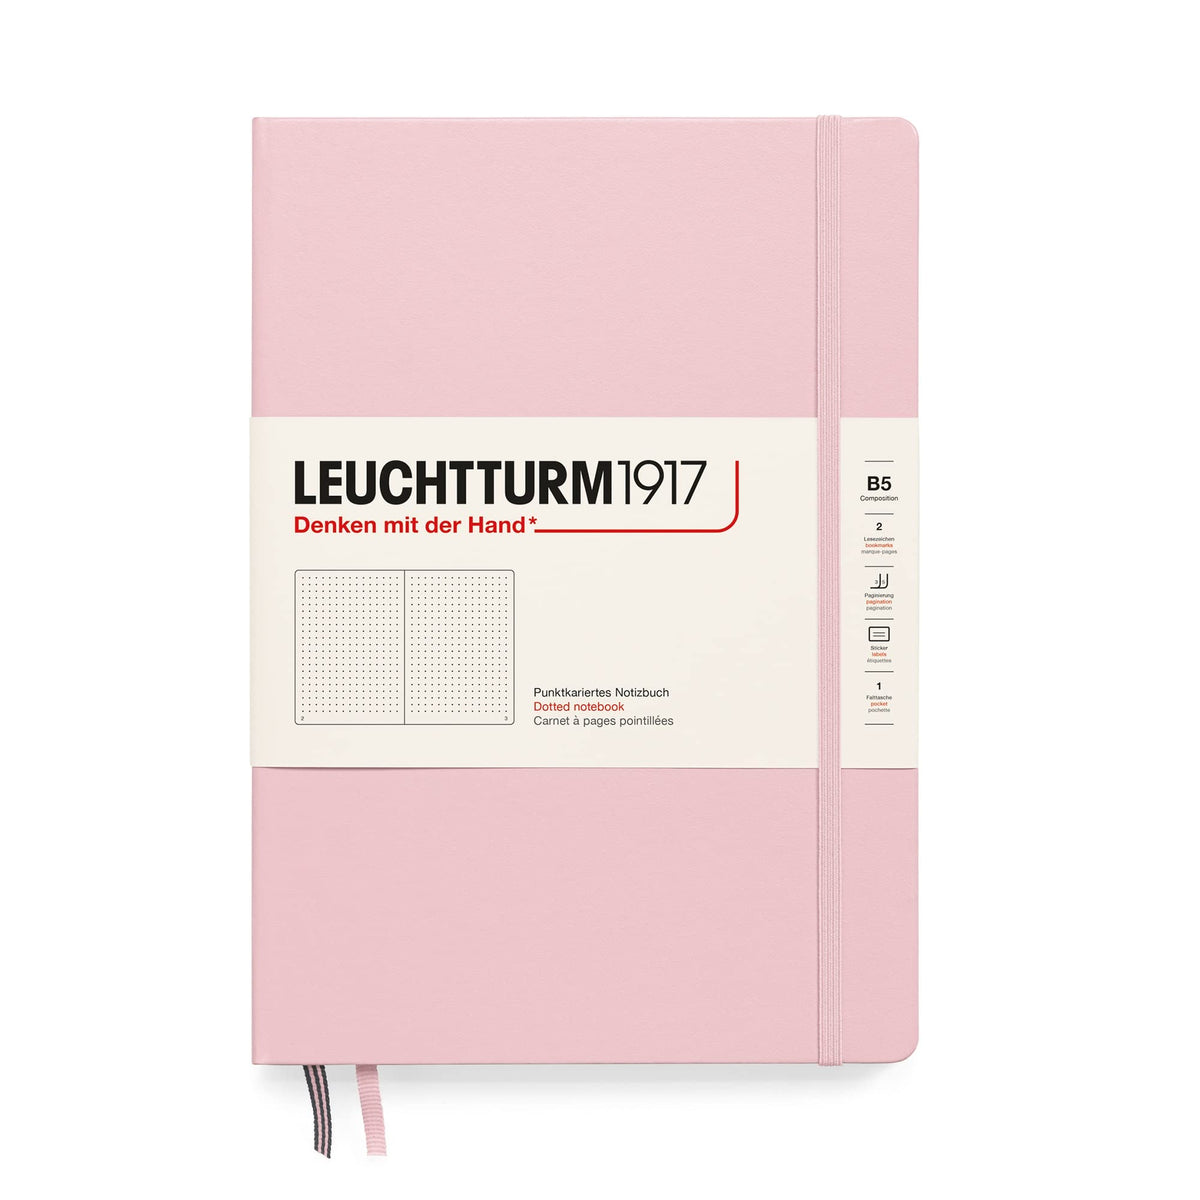 Leuchtturm1917 366159 Notebook Composition (B5), Hardcover, 219 numbered pages, Powder, Dotted